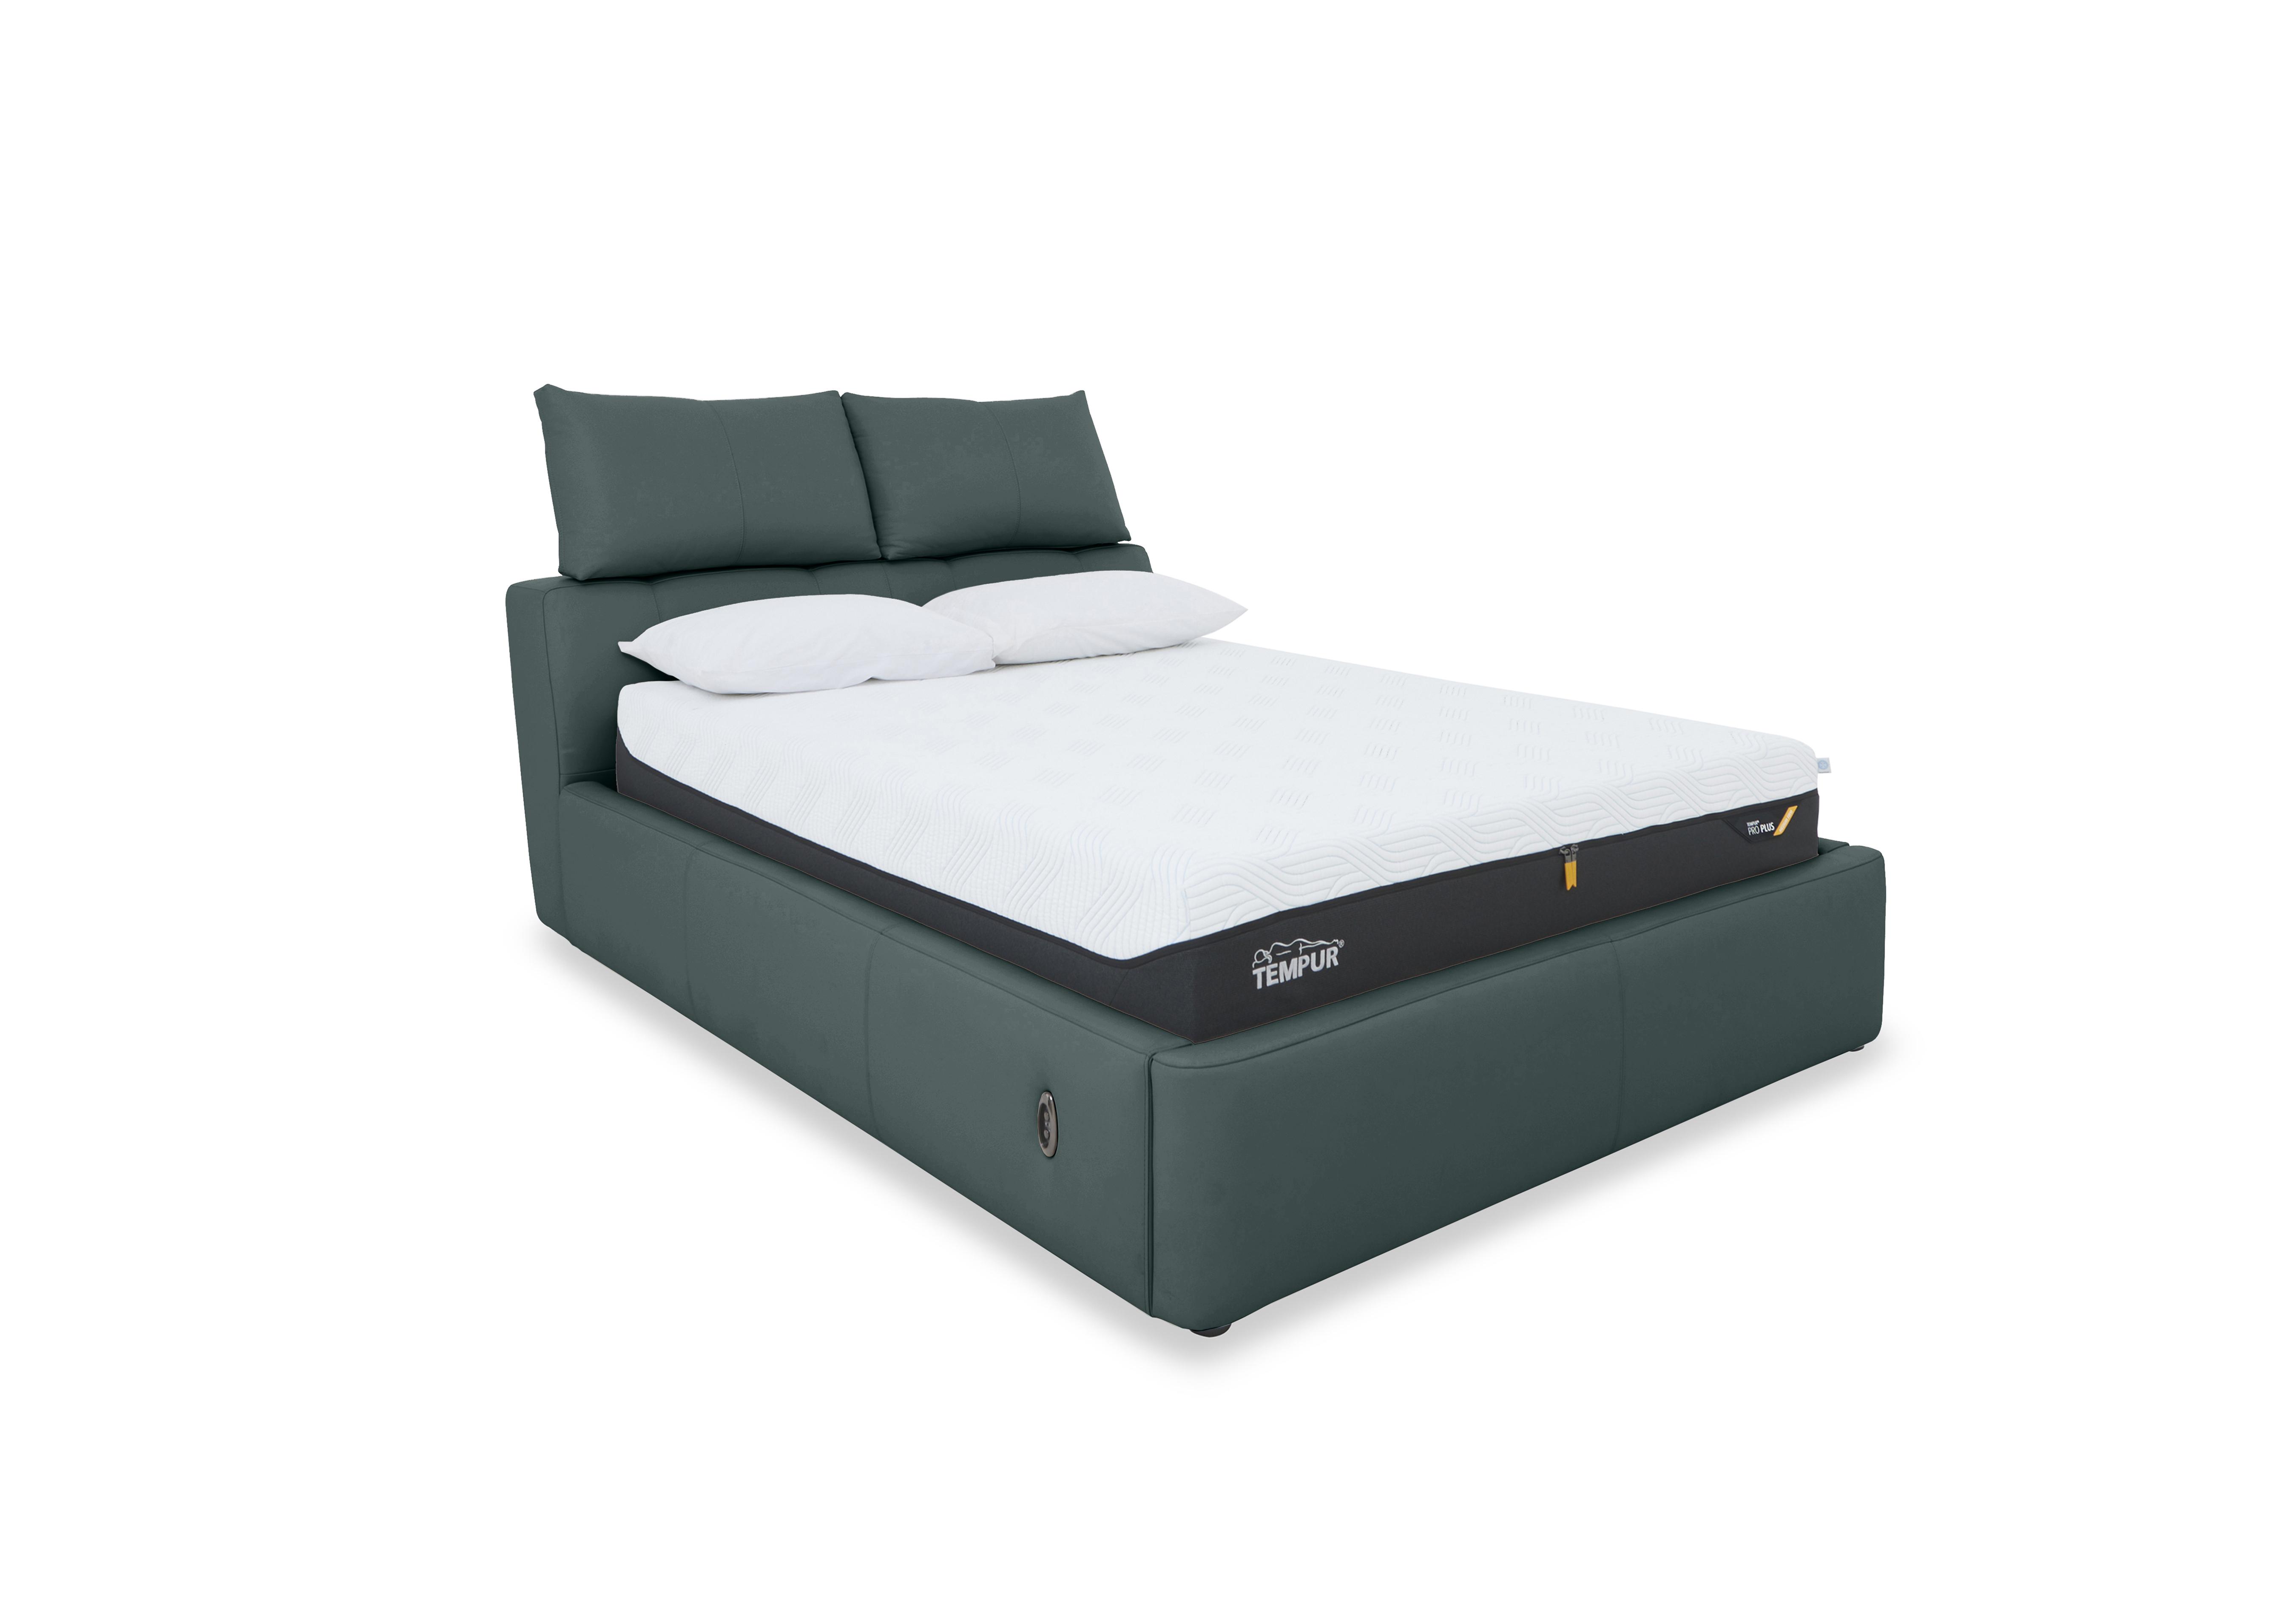 Tyrell Leather Electric Ottoman Bed Frame in Bv-301e Lake Green on Furniture Village